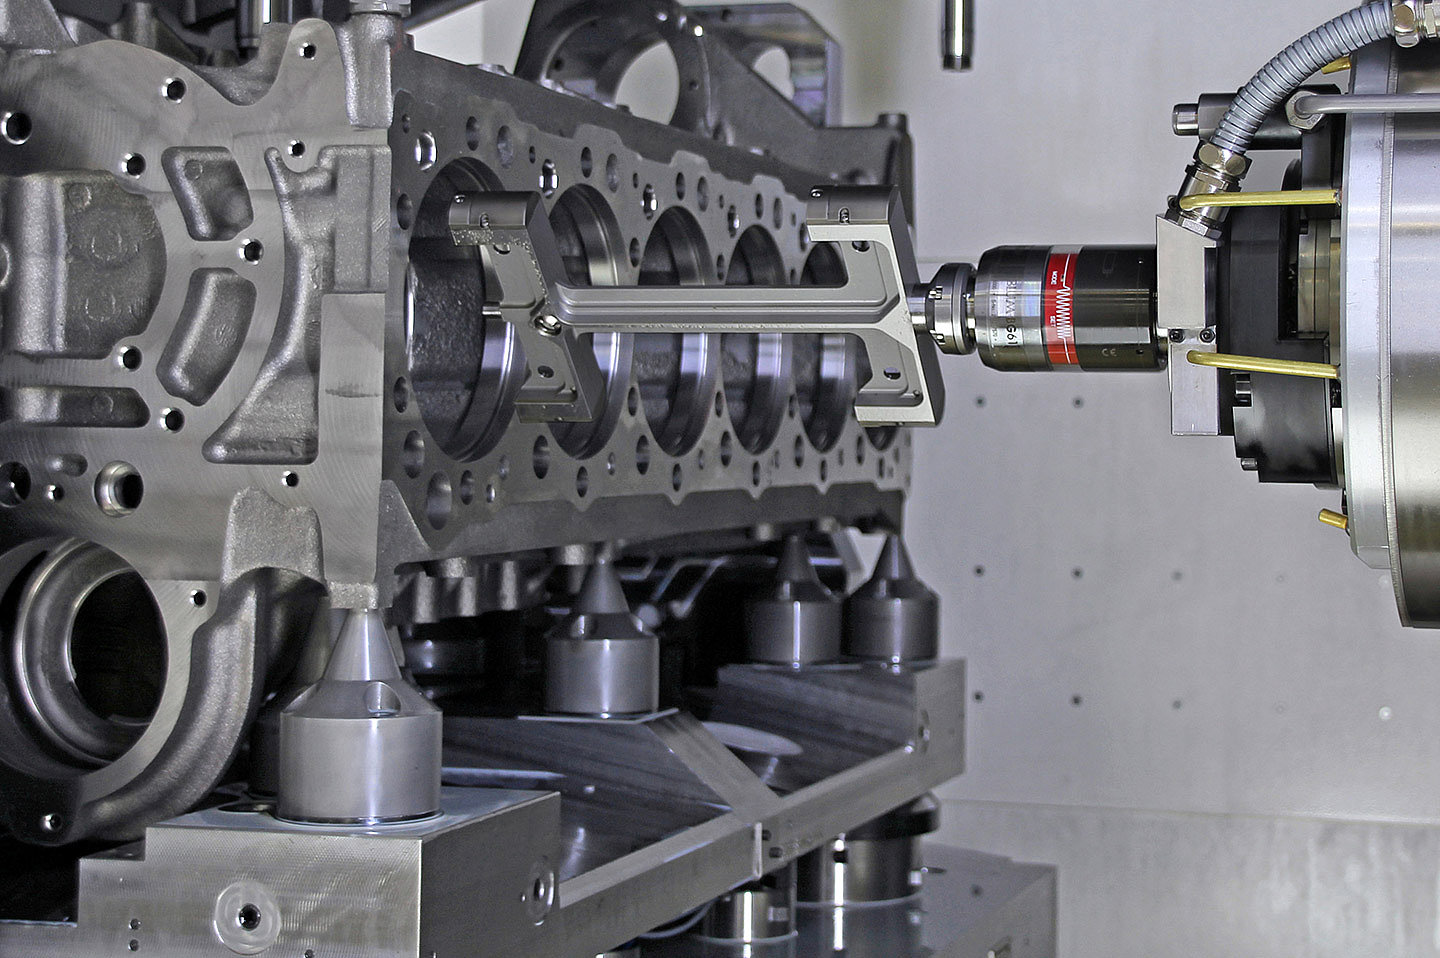 Measurement of cylinder bores in line production